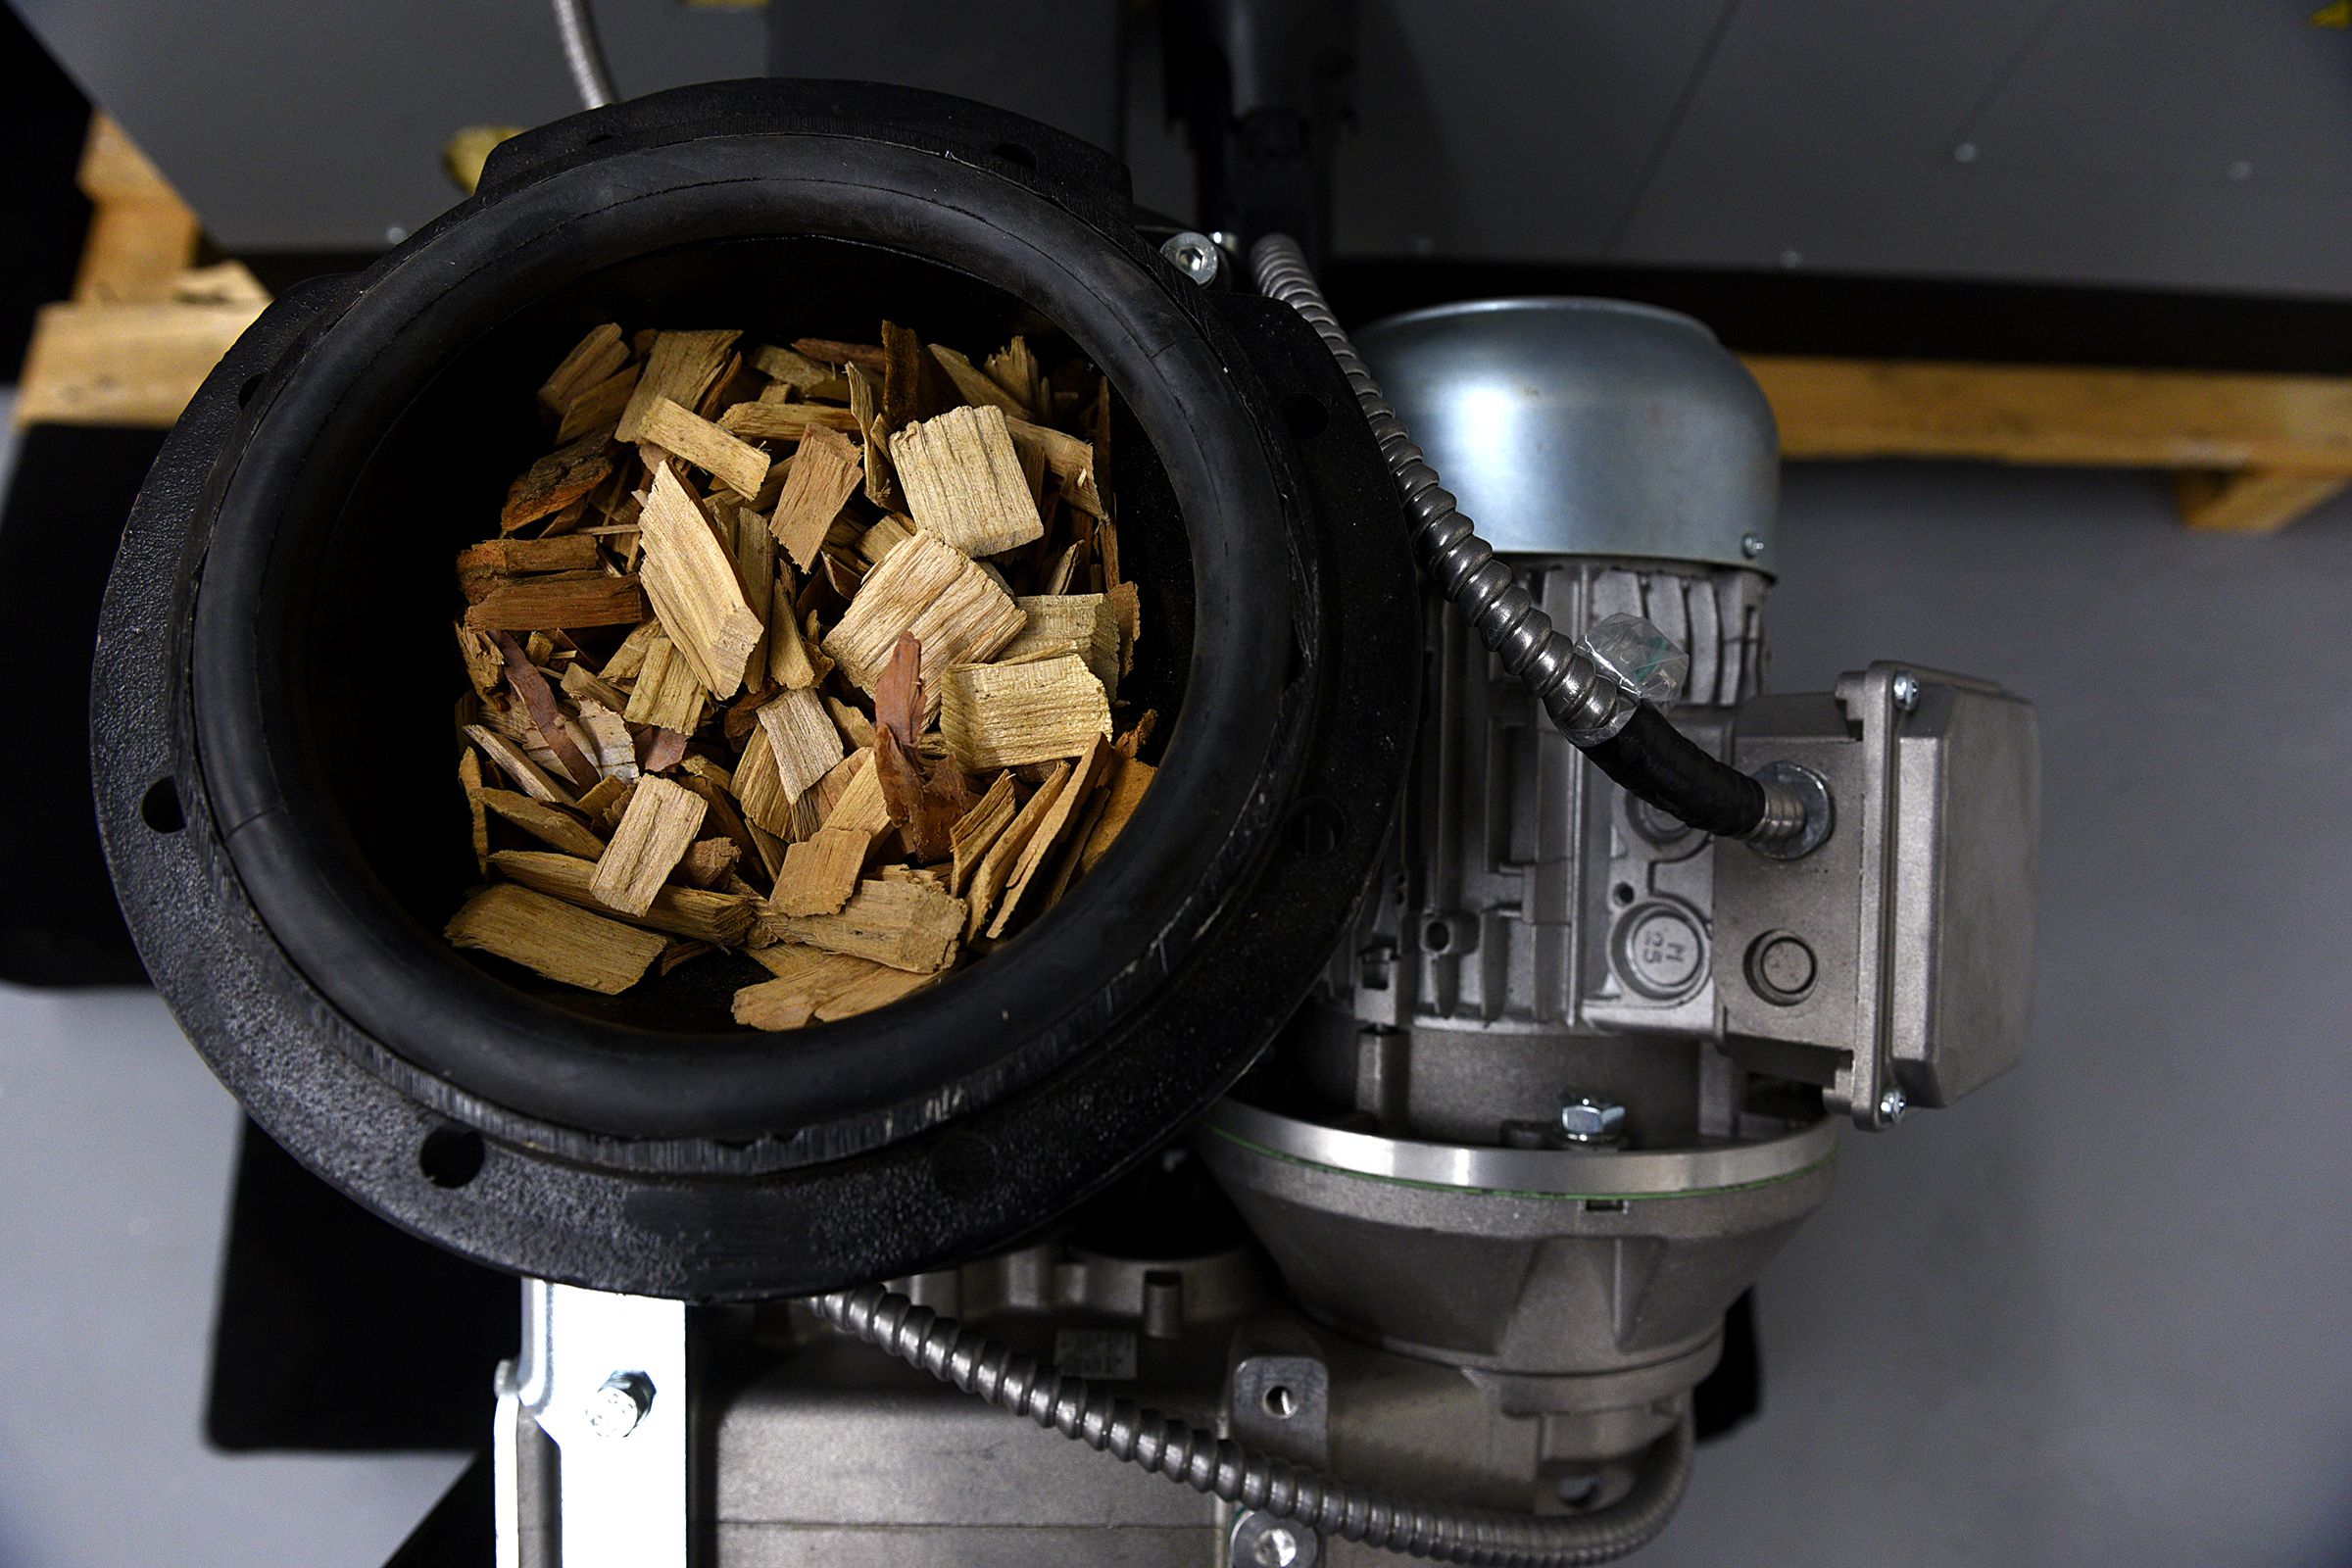 A wood chip stoker at Tarm Biomass, in Orford, N.H., on Nov. 17, 2016. (Valley News - Jennifer Hauck) Copyright Valley News. May not be reprinted or used online without permission. Send requests to permission@vnews.com.